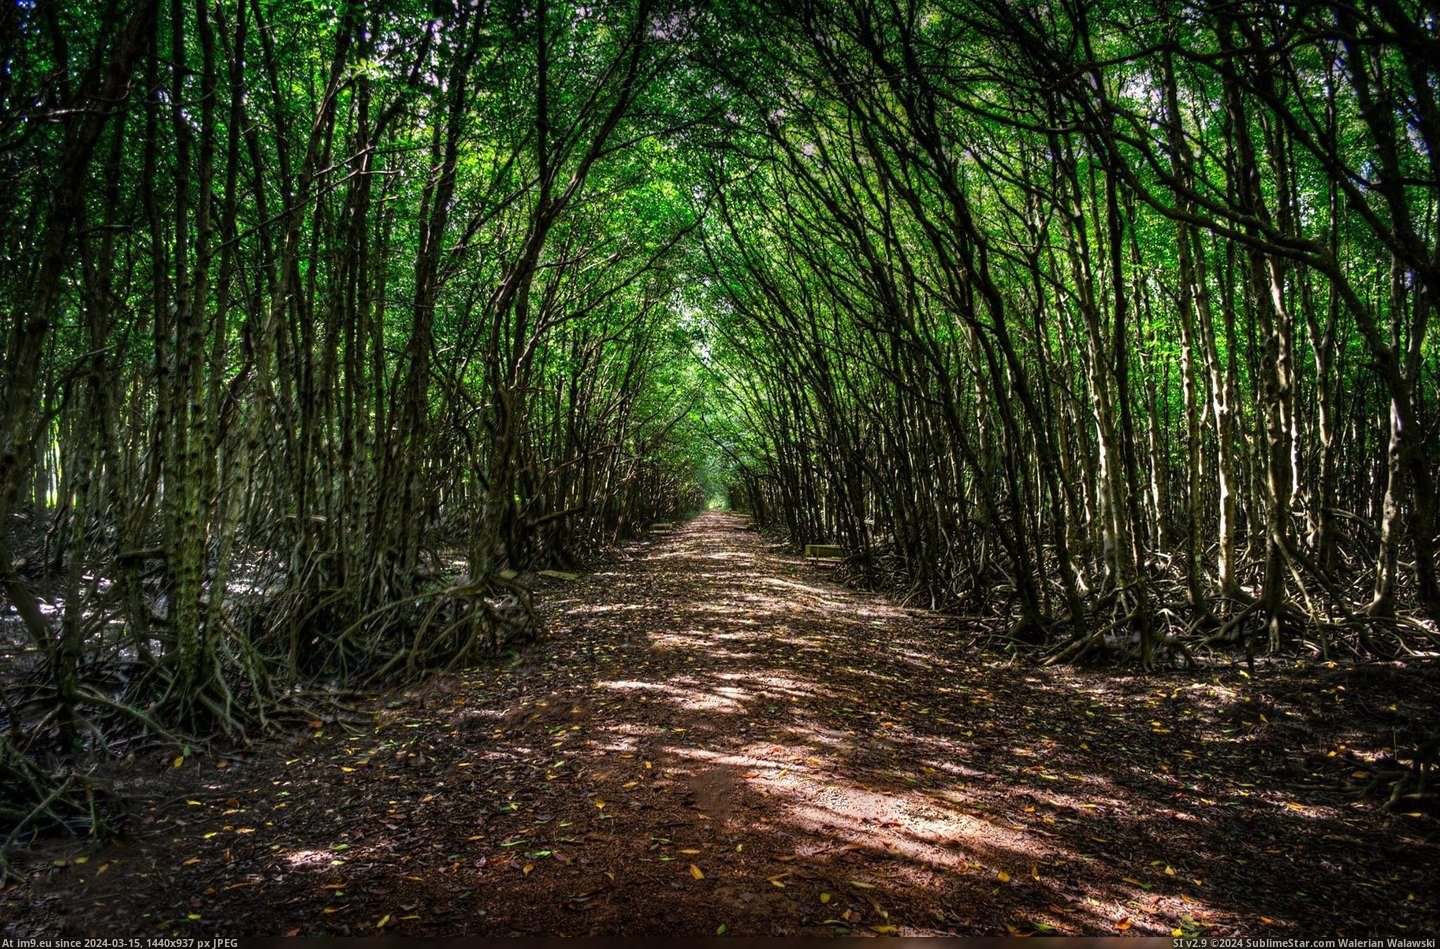 #City #South #Vietnam #Forest #Path [Earthporn] Path in Can Gio Forest, Vietnam. 1h south from HoChiMinh City by motorbike [2048x1344] Pic. (Image of album My r/EARTHPORN favs))